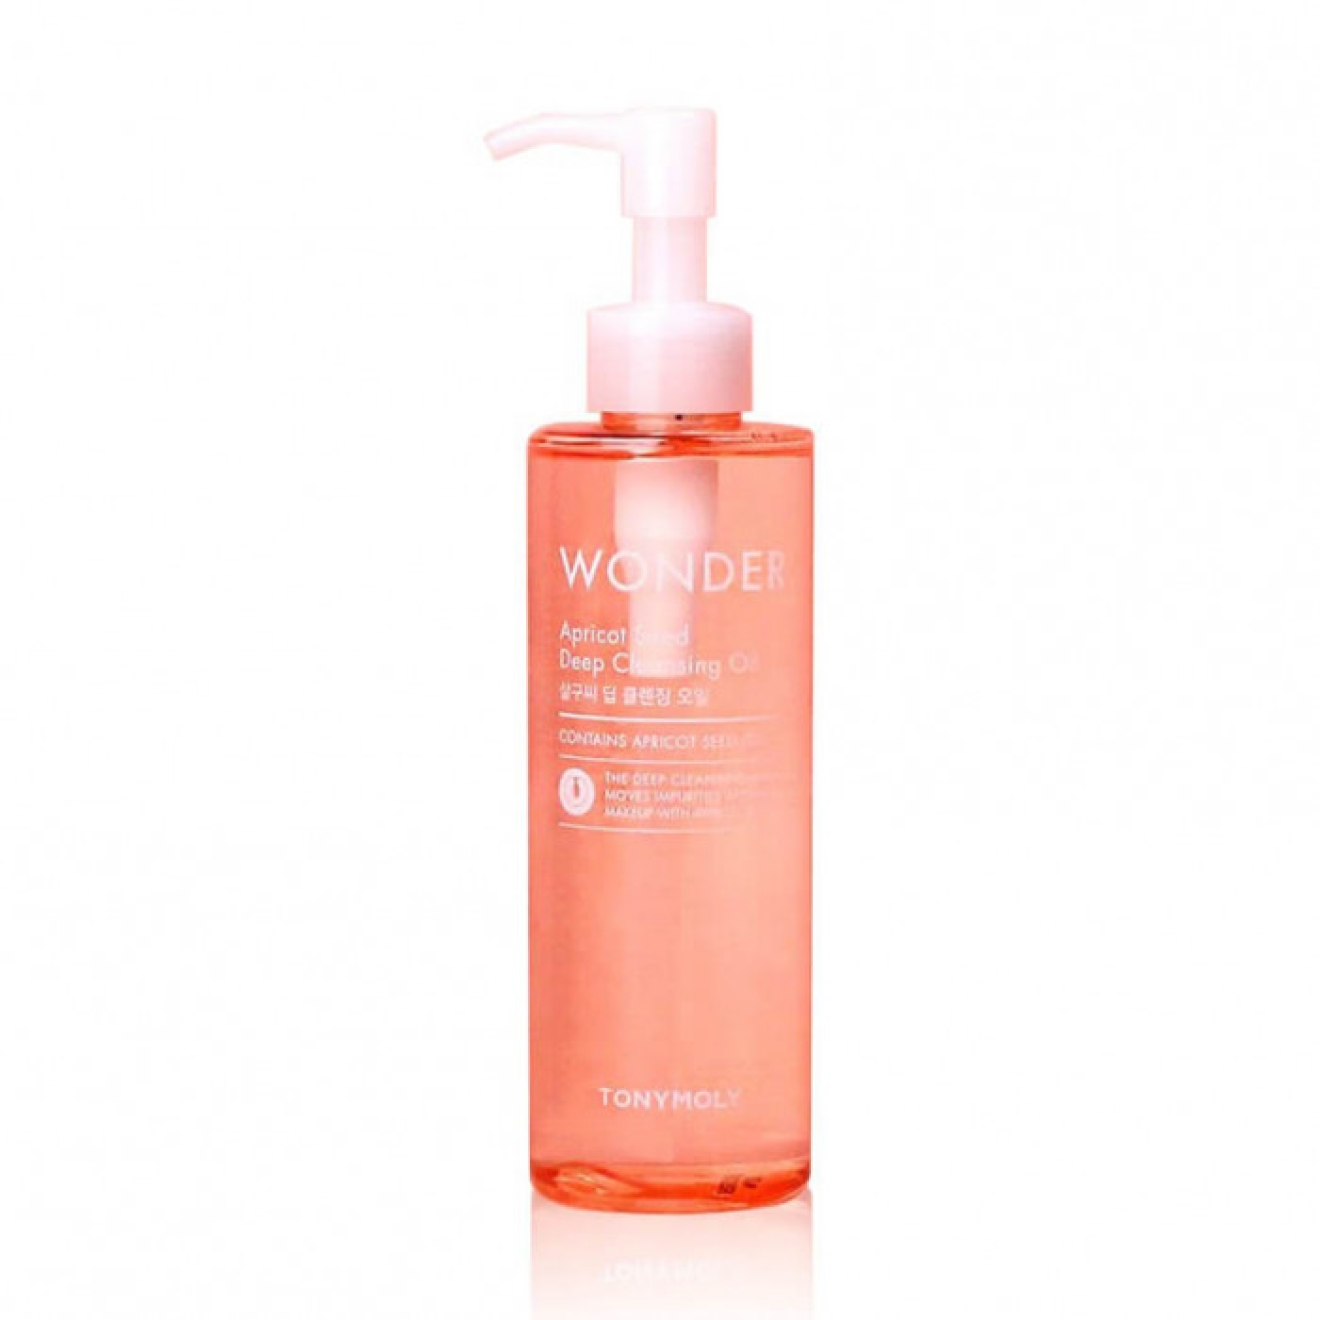 Tony Moly, Wonder Apricot Deep Cleansing Oil, 190 ml